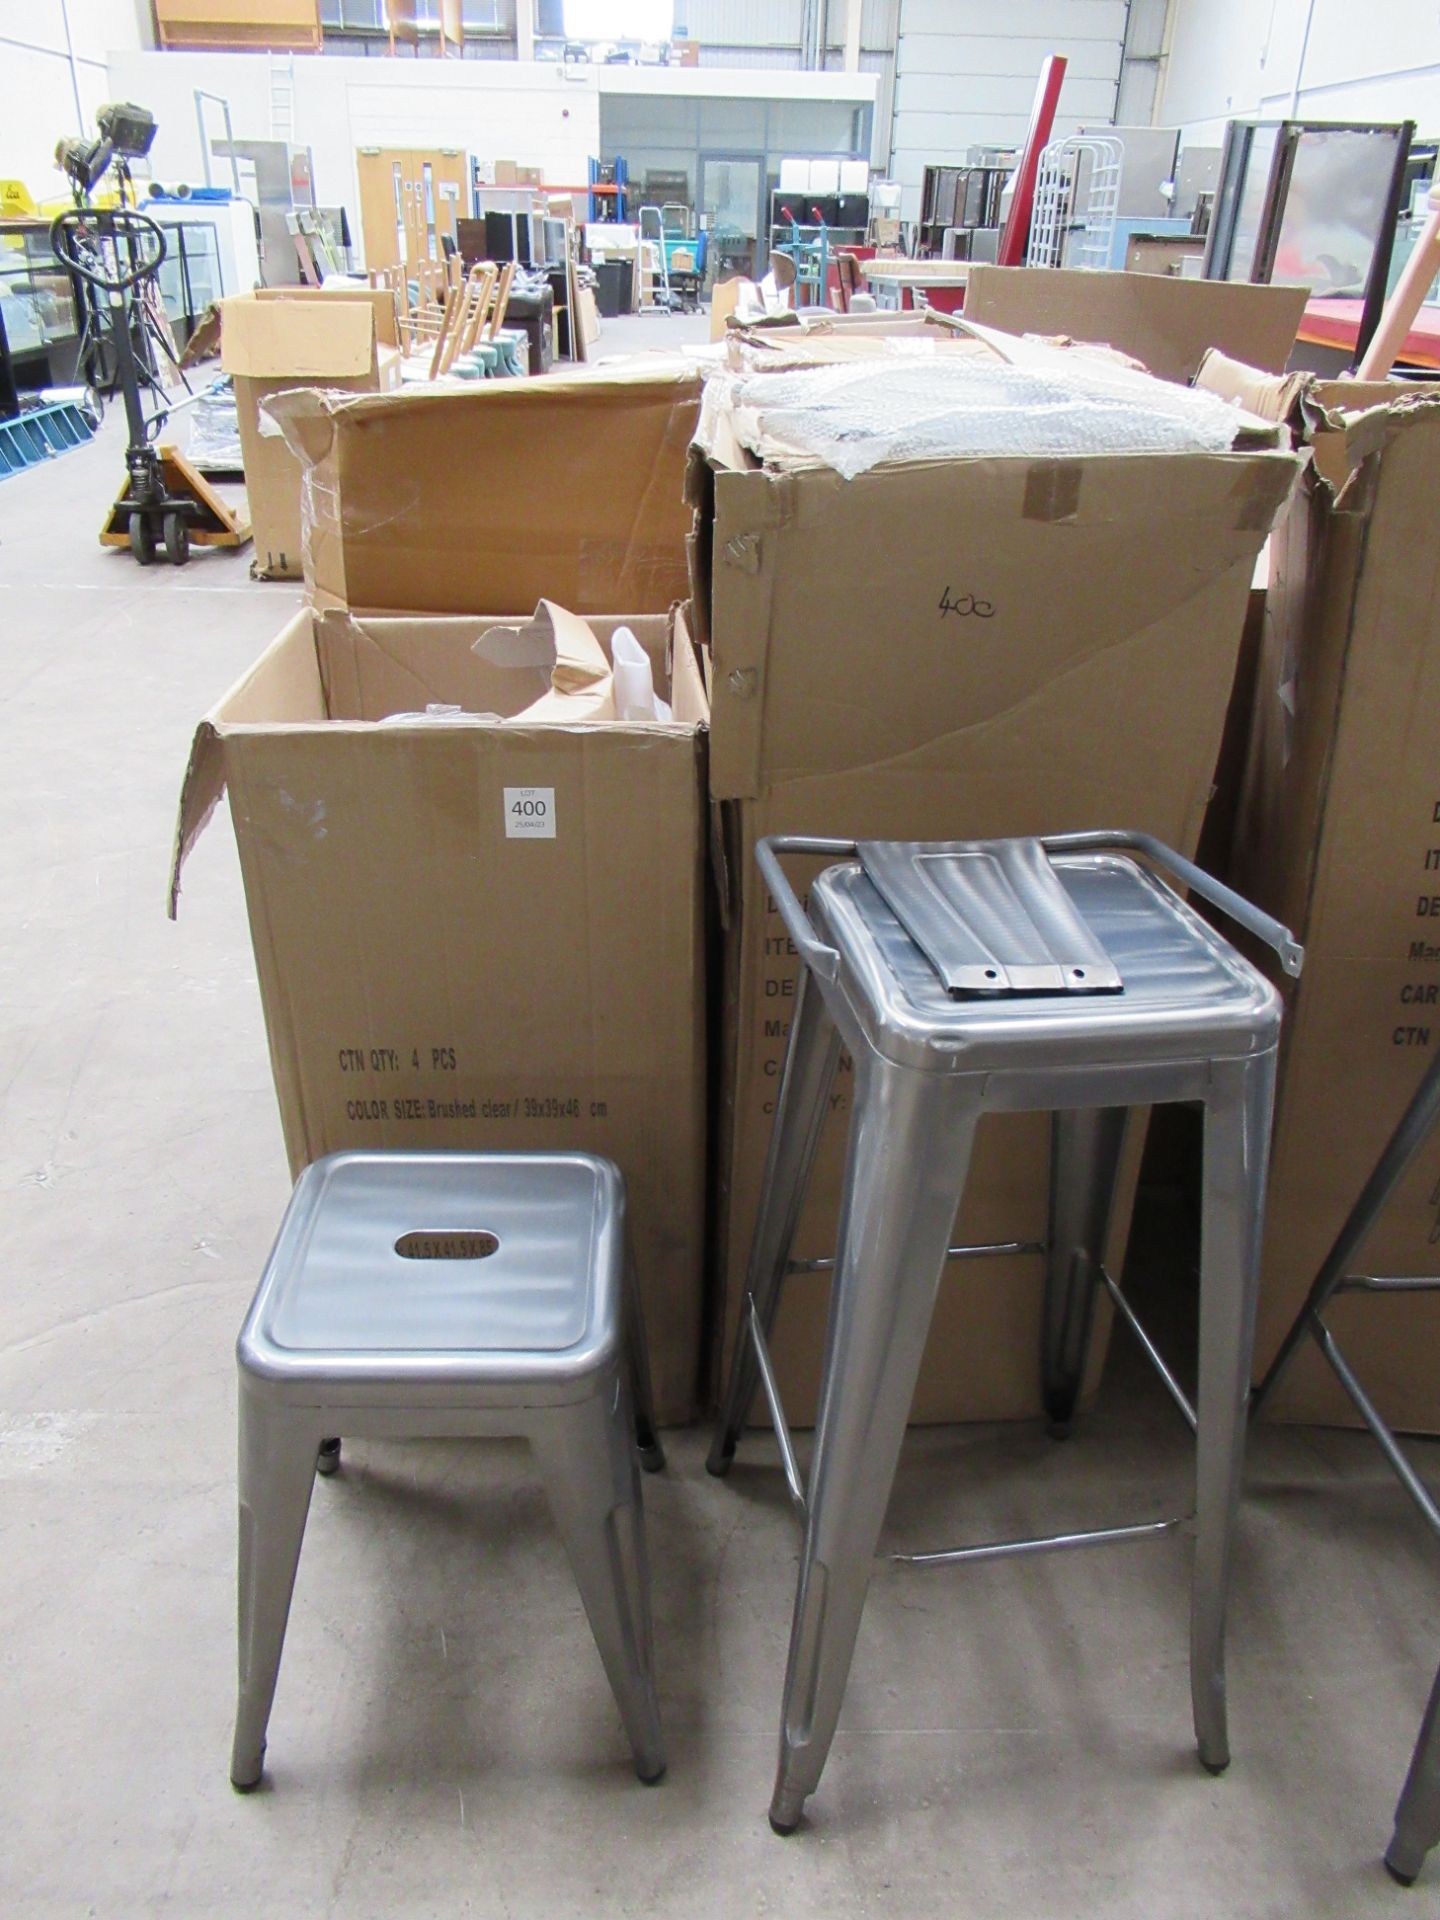 3x Brushed Clear Stools and 3x Brushed Clear Stools with Backs (no screws)